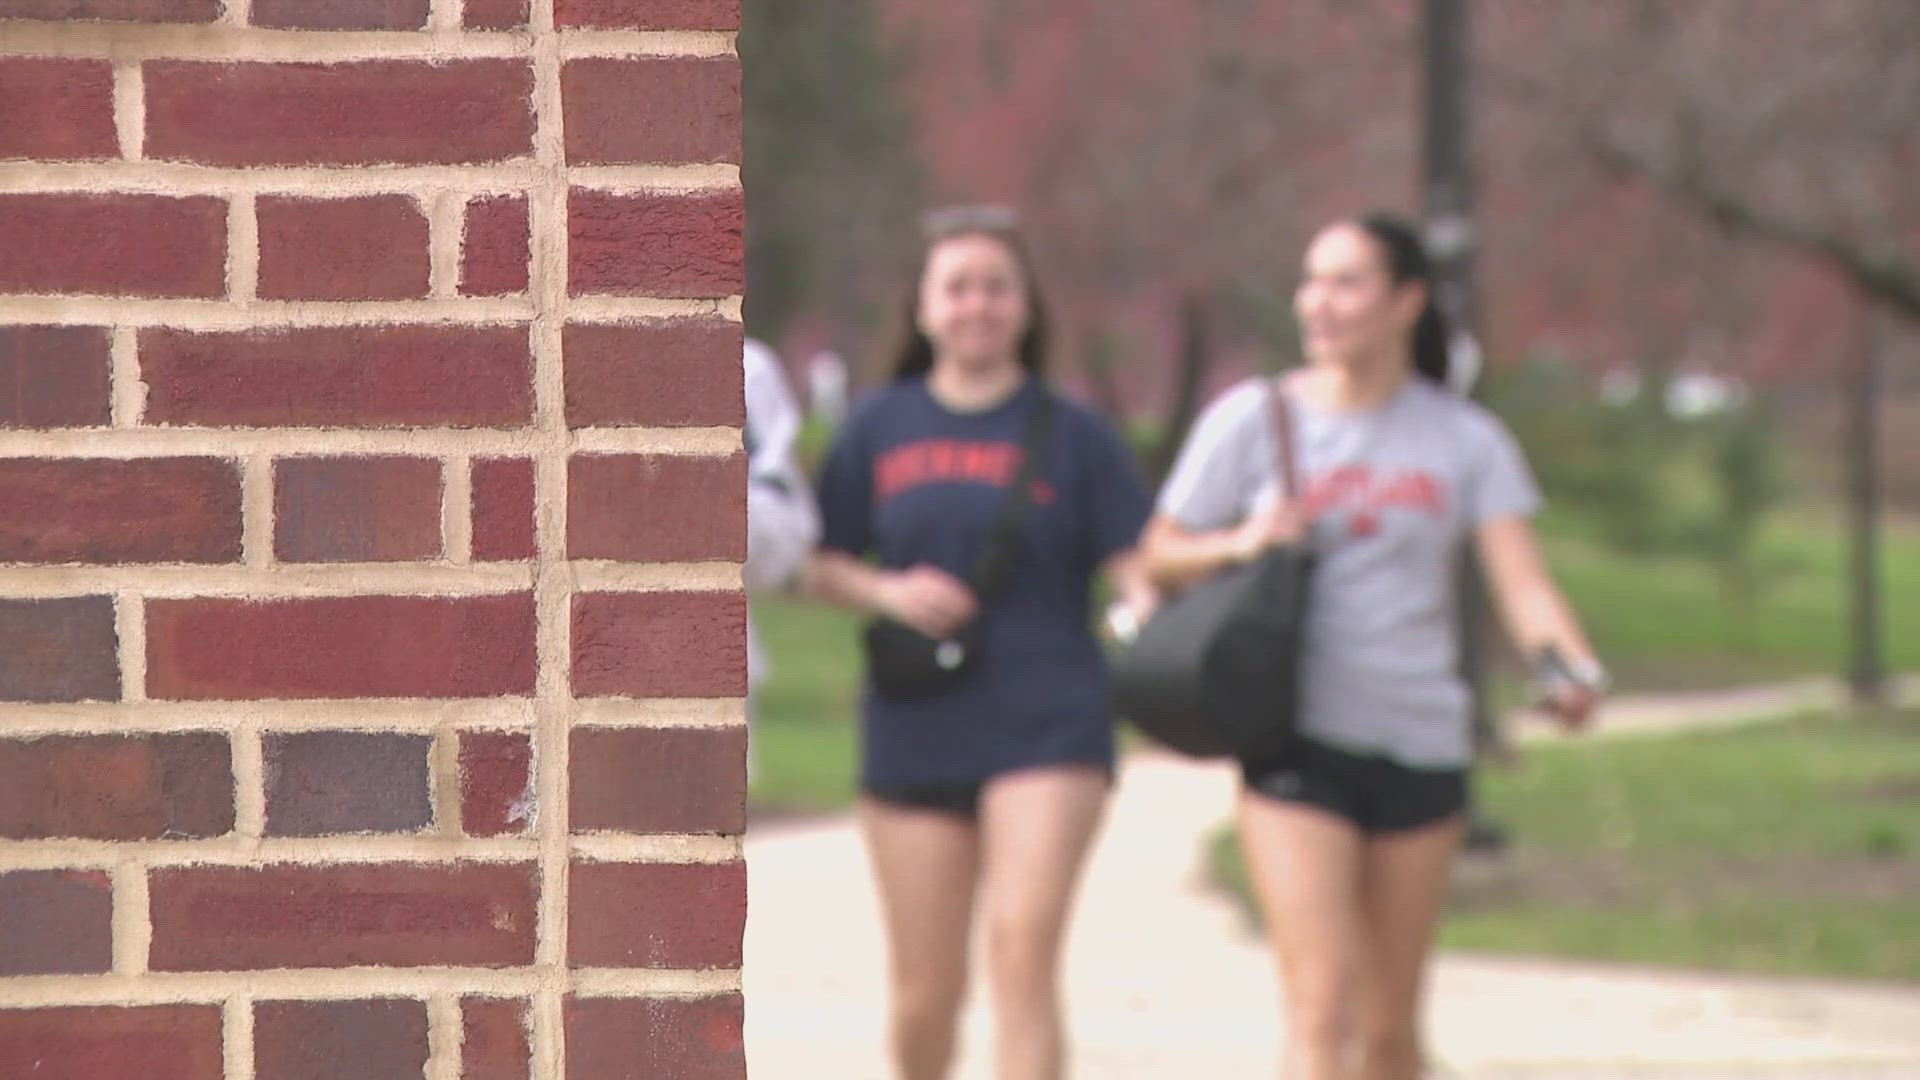 Greek life activity was shut down for a safety investigation.